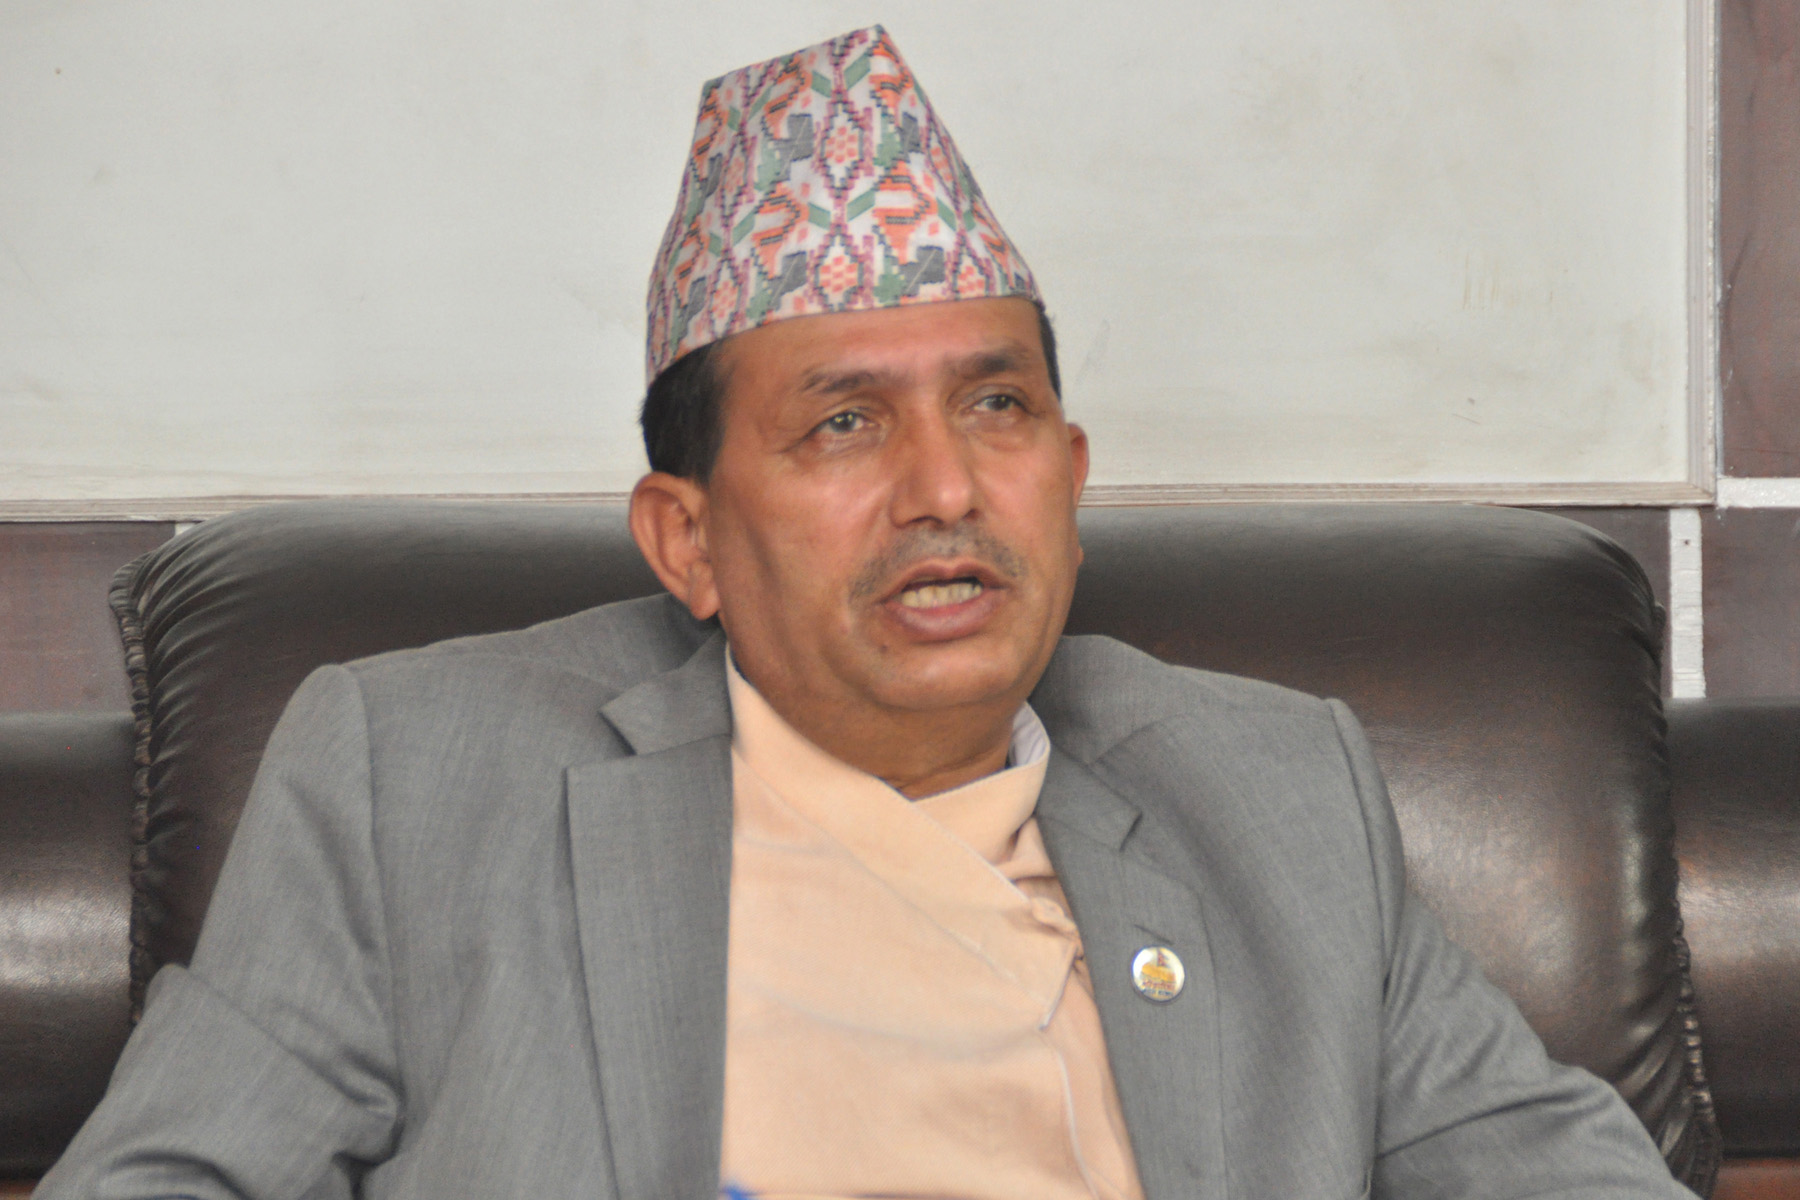 Research imperative to ensure quality health service: Minister Dhakal